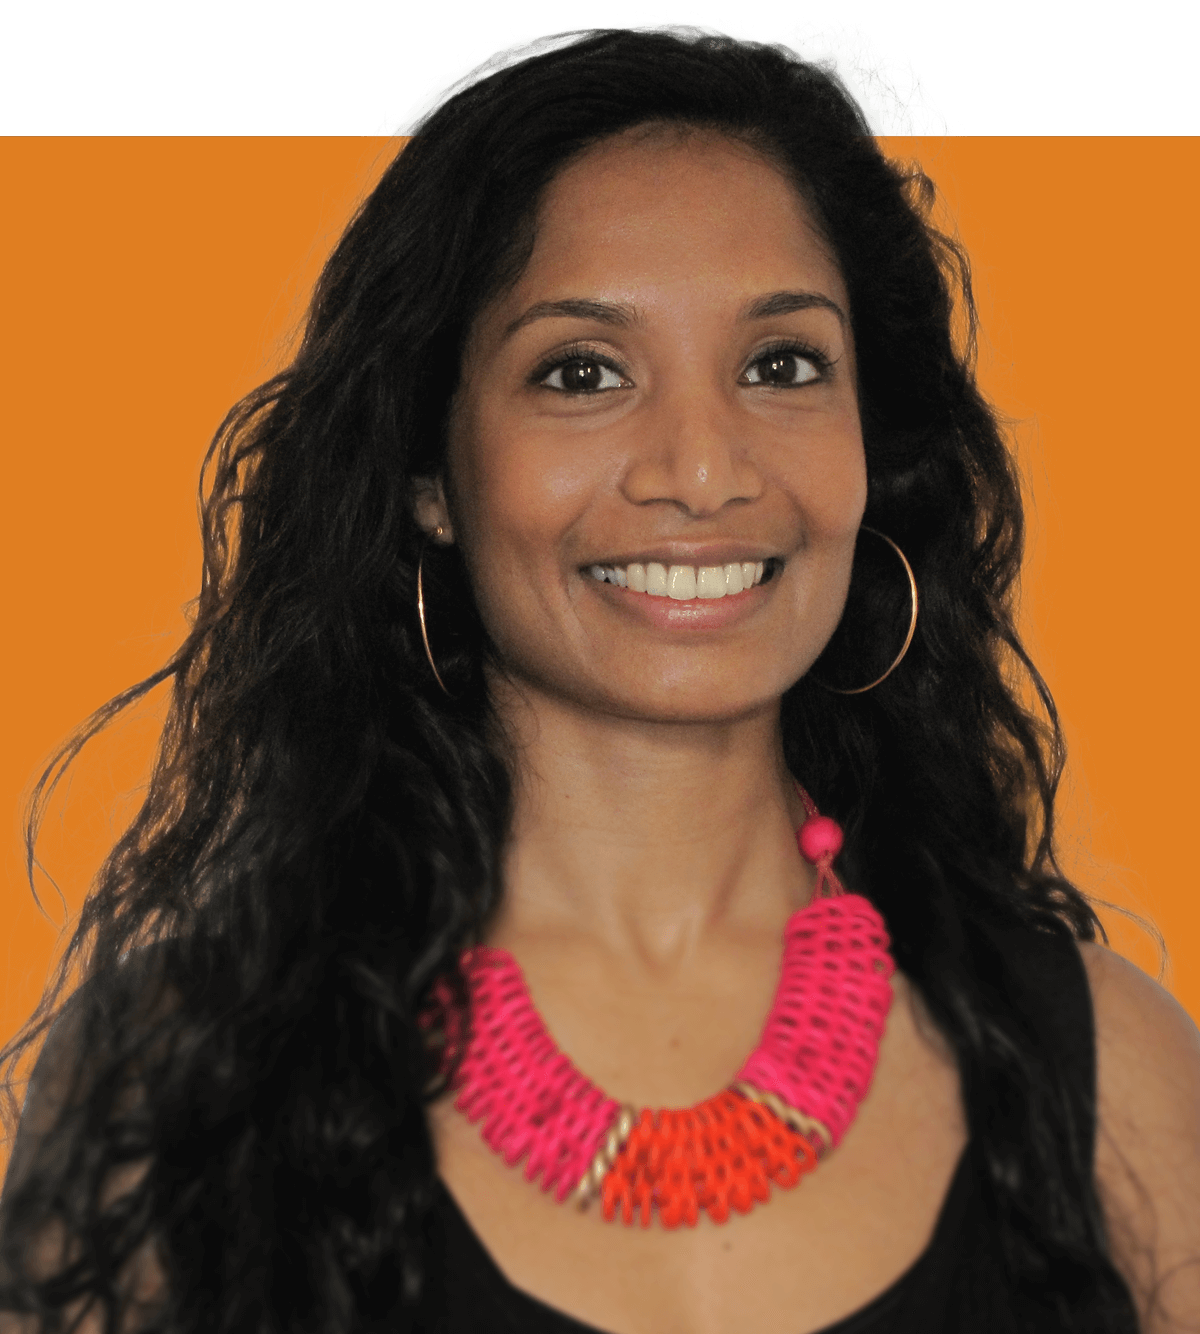 Head shot of UK Health lead Nivey Nocher. She is a Sri Lankan woman with long dark hair and brown eyes. She is wearing a large brightly coloured necklace and black vest top as she smiles at the camera.